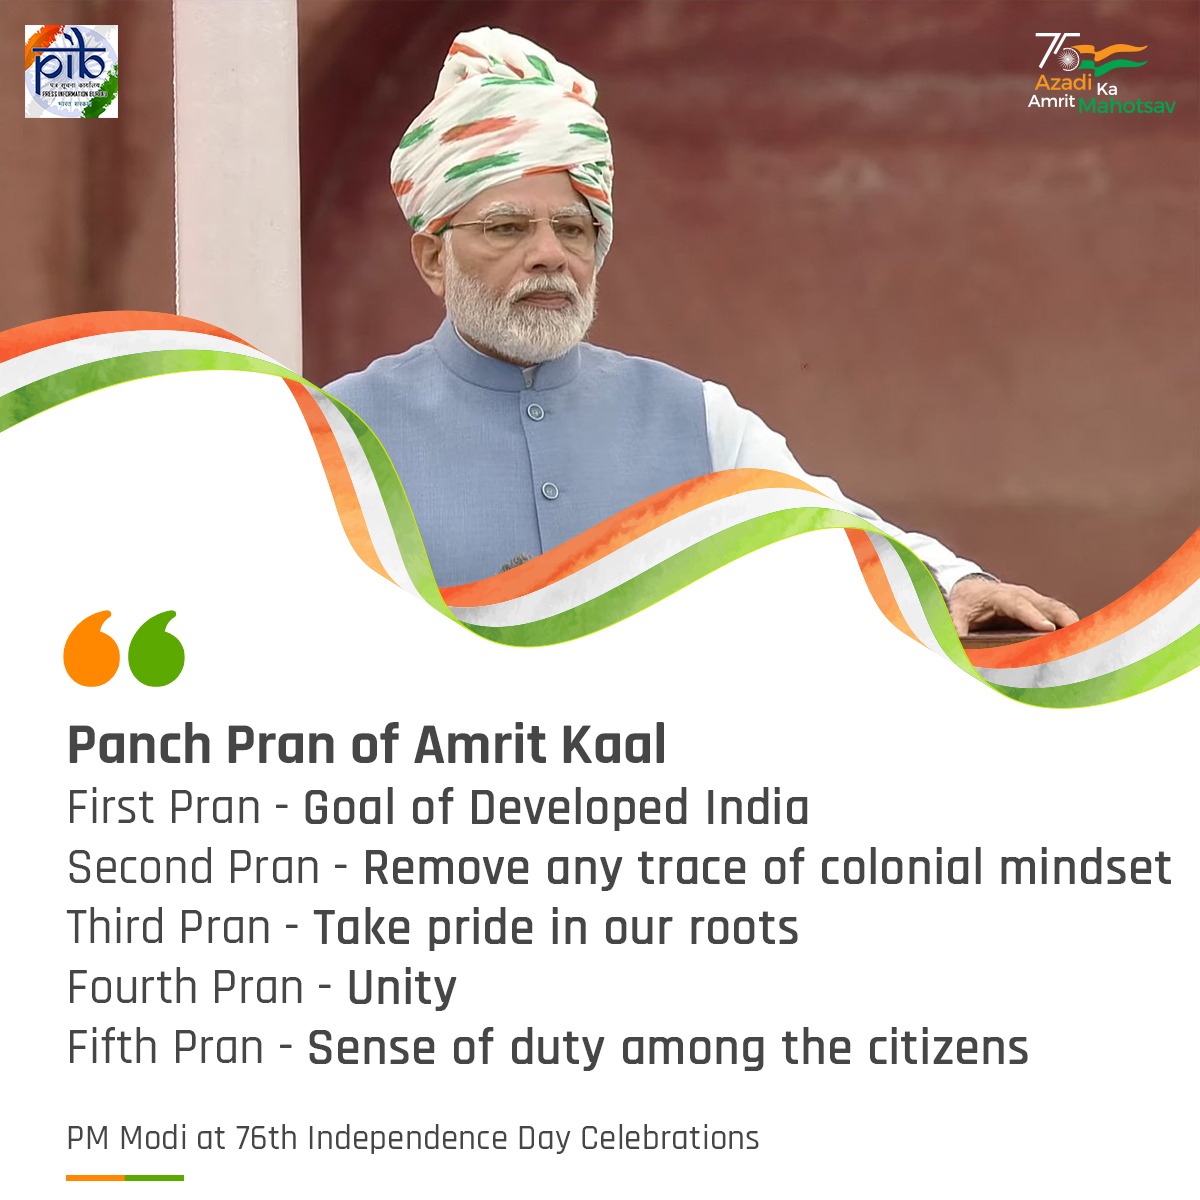 PM Shri Narendra Modi addresses the 76th Independence Day celebrations and gives the #PanchPran of #AmritKaal which includes the goal of a developed India and a sense of duty among the citizens.
#IndependenceDay  
@Nyksindia @cleanganganmcg 
@asokji @gssjodhpur @Anurag_Office